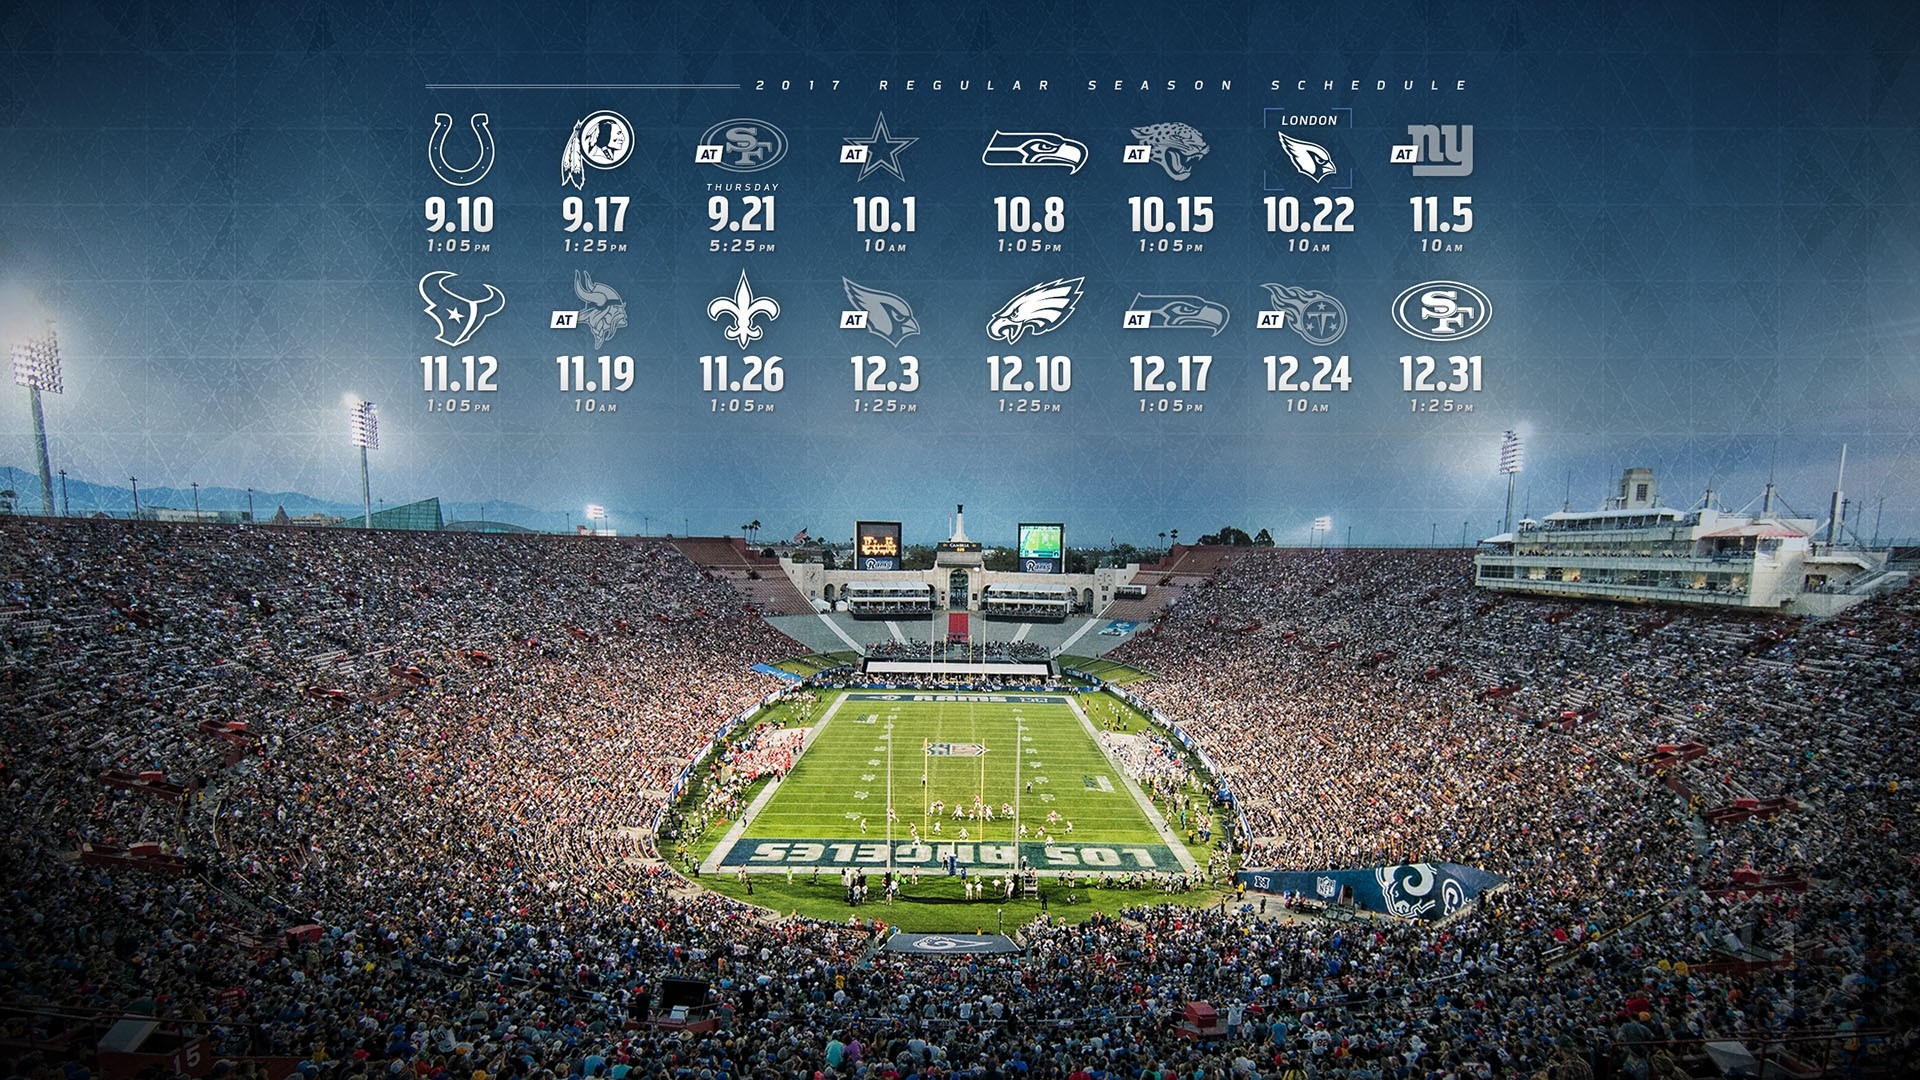 1920x1080 ... 2017 Rams Schedule Wallpapers Wallpapers For Boys 2017